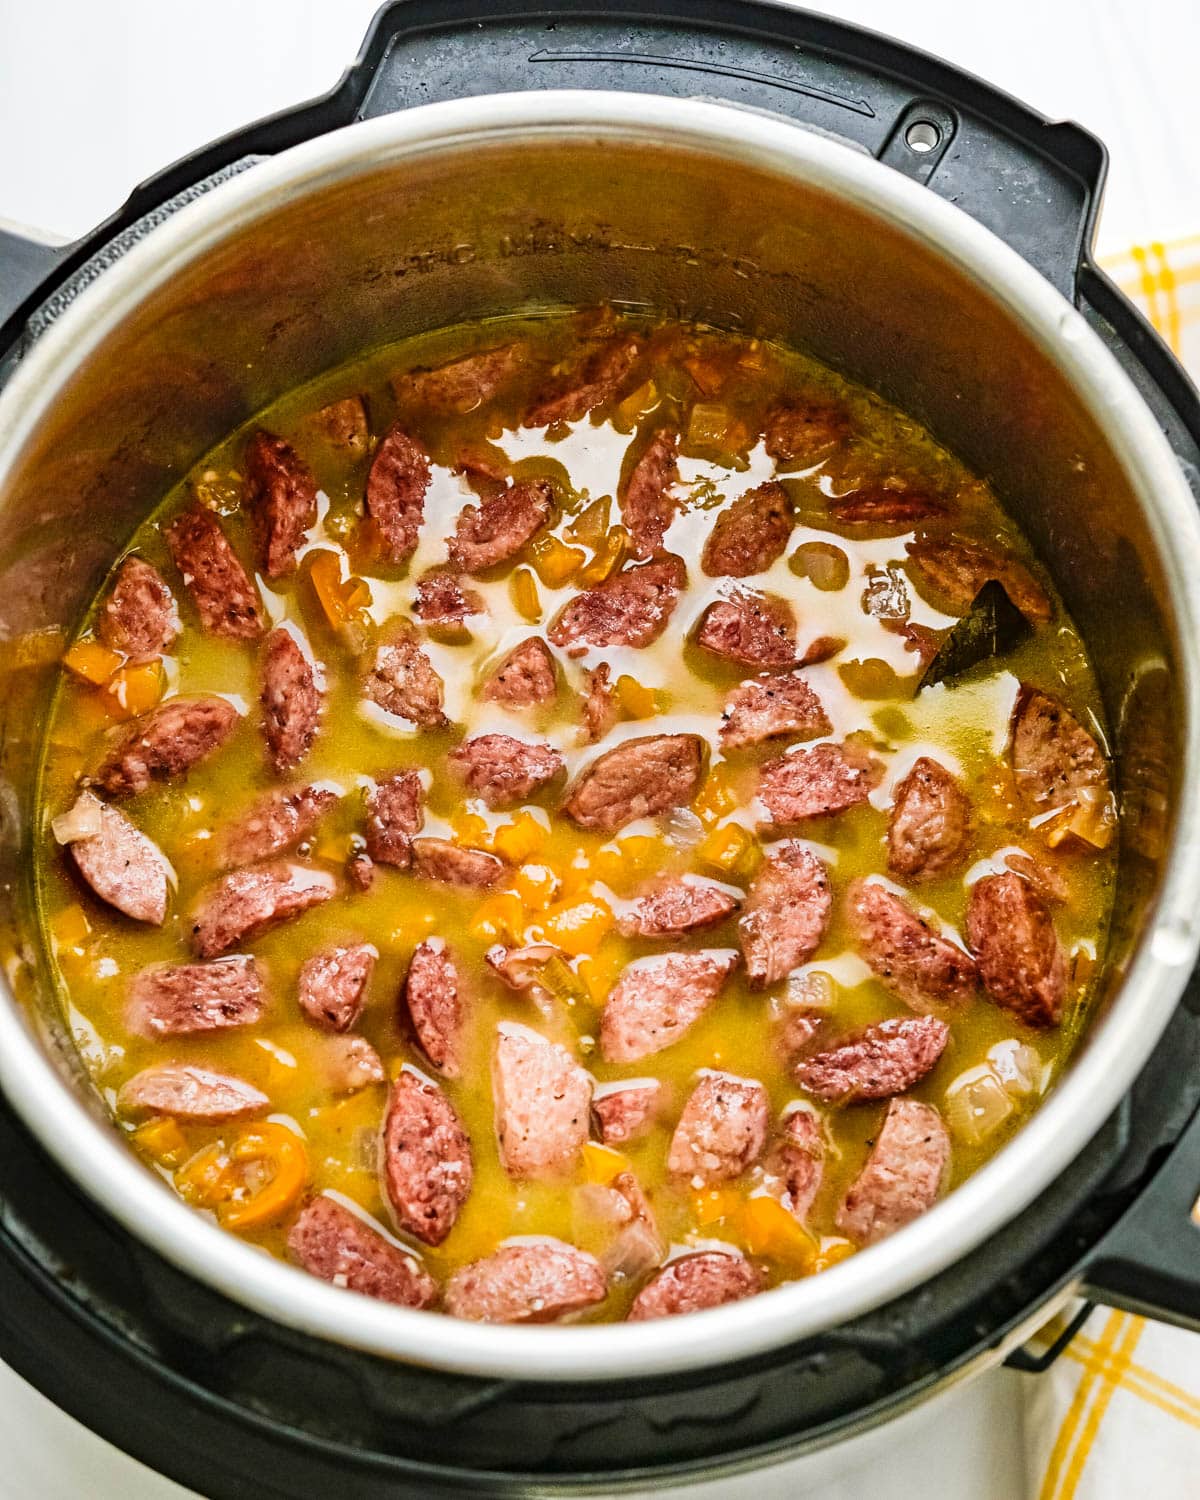 Adding smoked sausage to the instant pot.